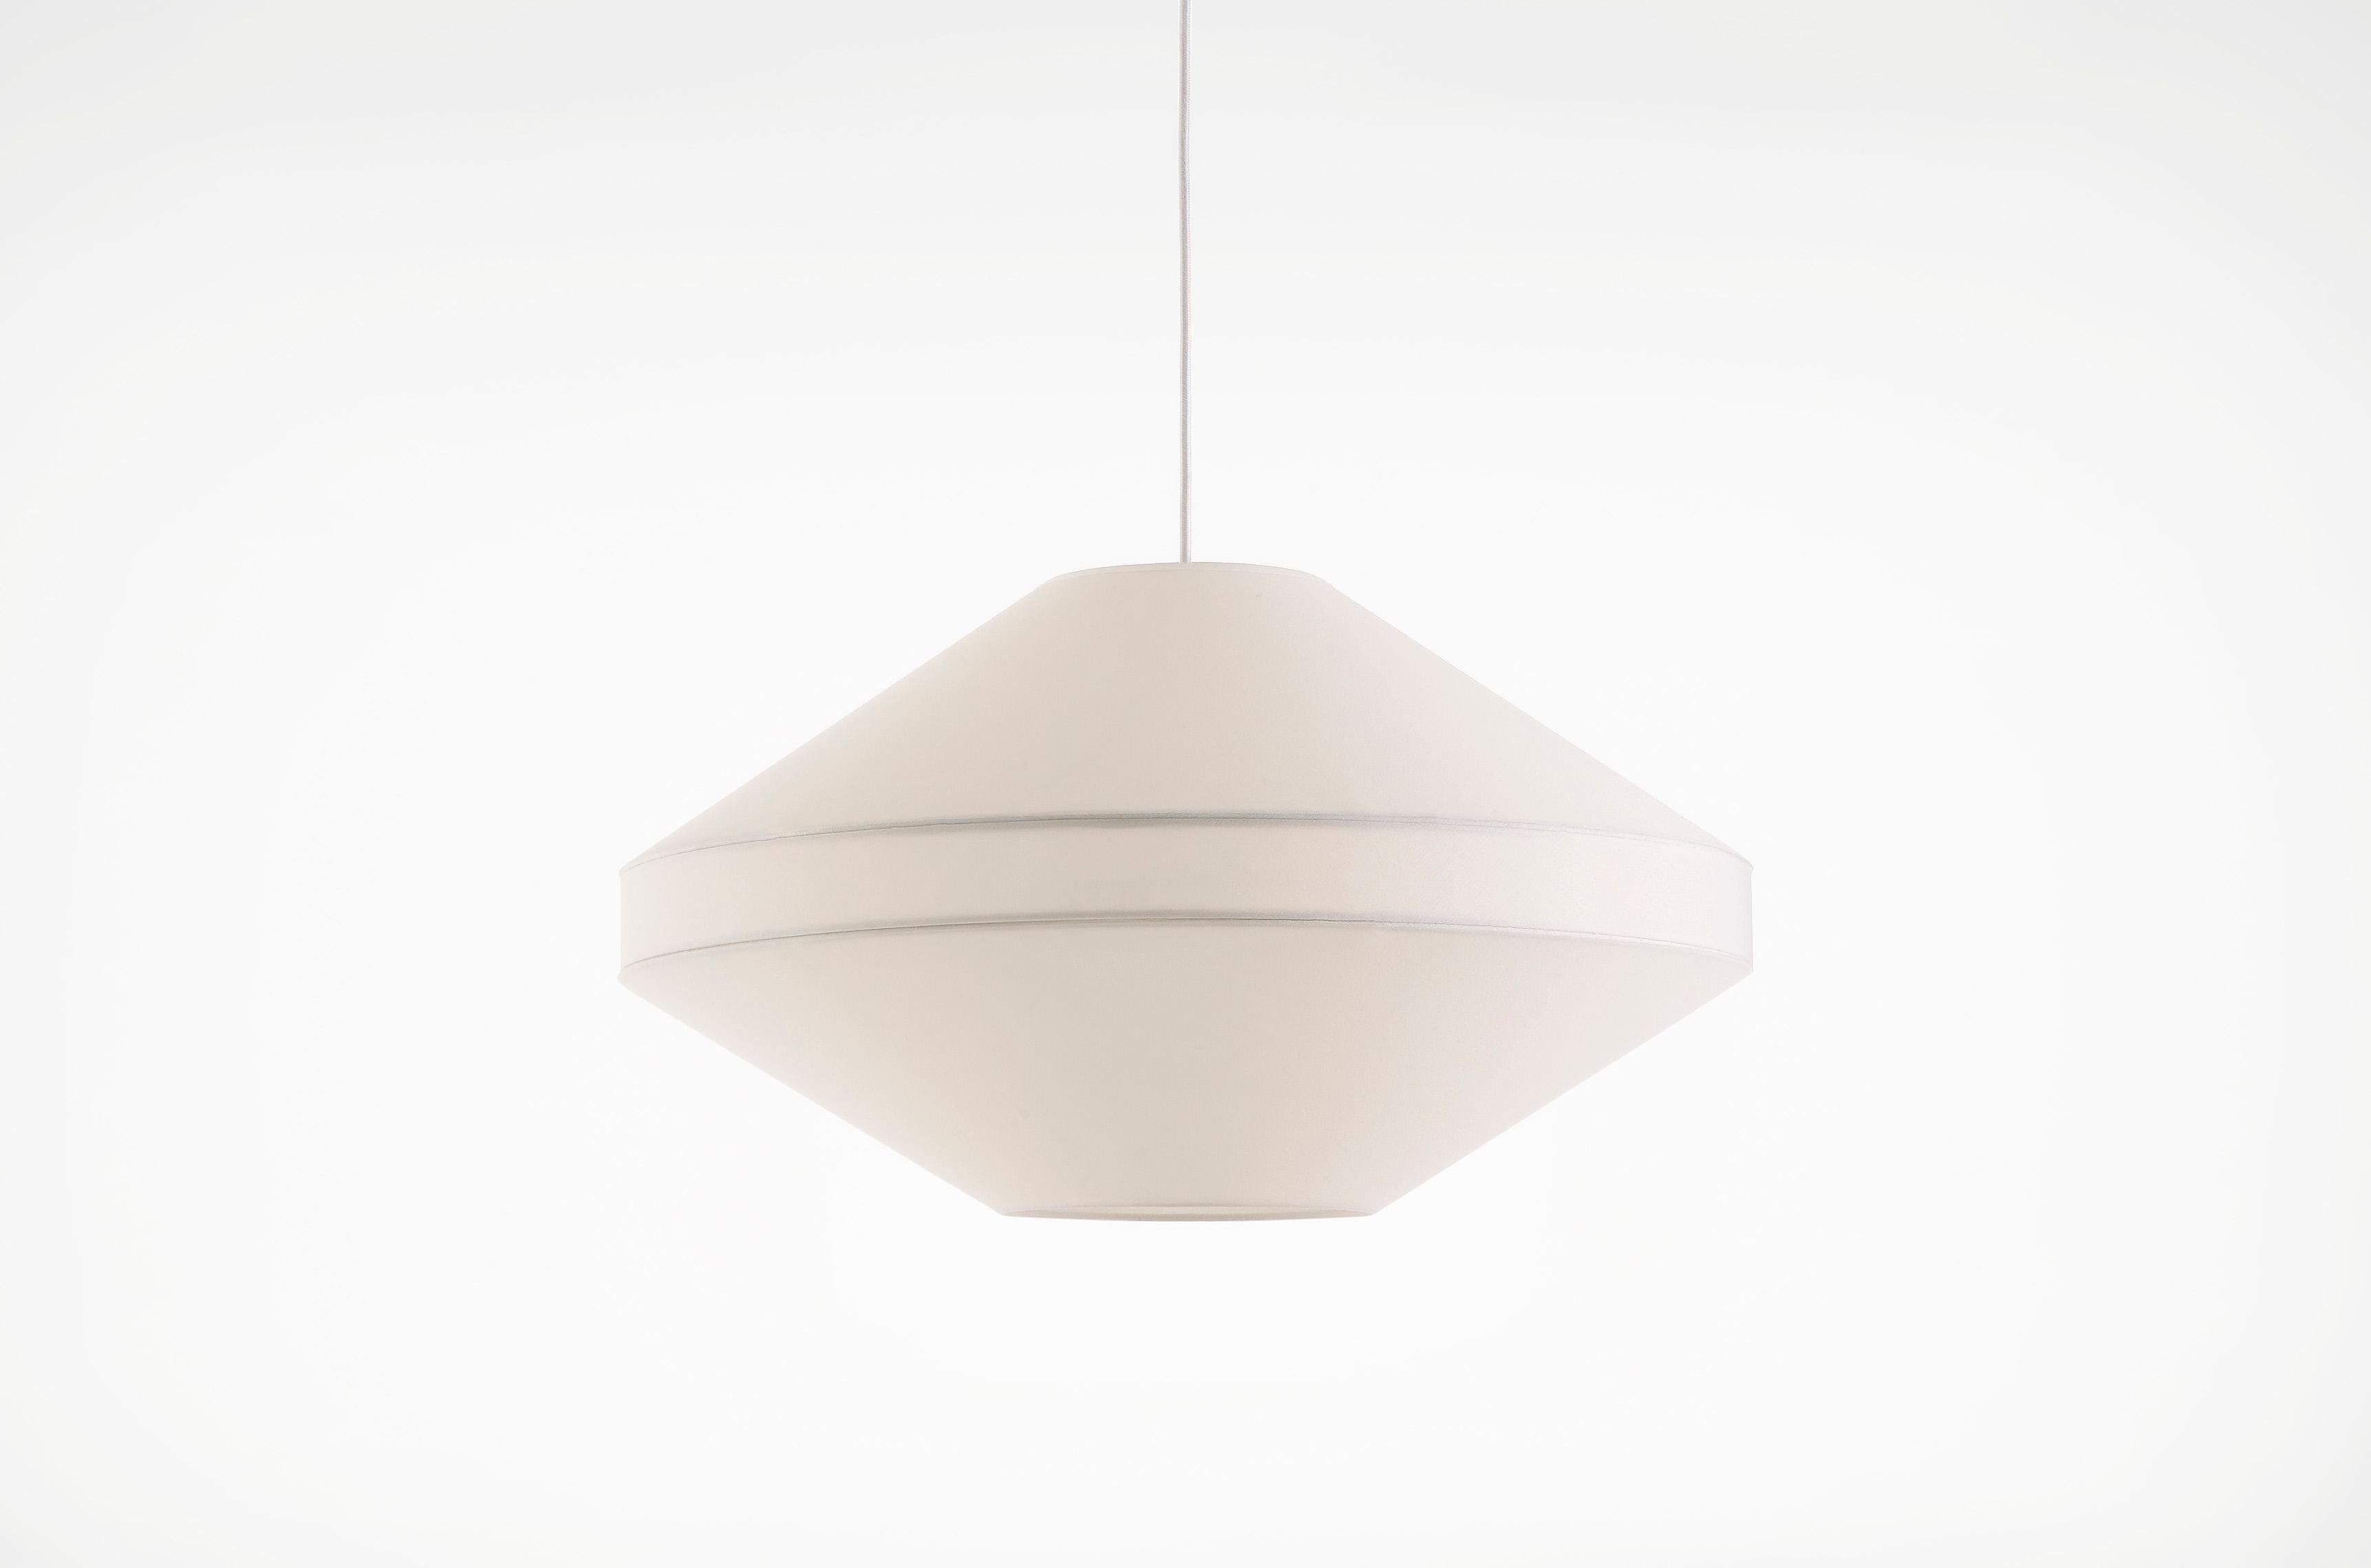 Mayu 02 Pendant Light by Coco Flip
Dimensions: D 60 x W 60 x H 34 cm
Materials: White mesh fabric on transparent backing. 
Weight: 2 kg

Standard fixtures included
Pendants:
1 x 80mm Ø ceiling canopy (white)
Black also available on request
2 metres